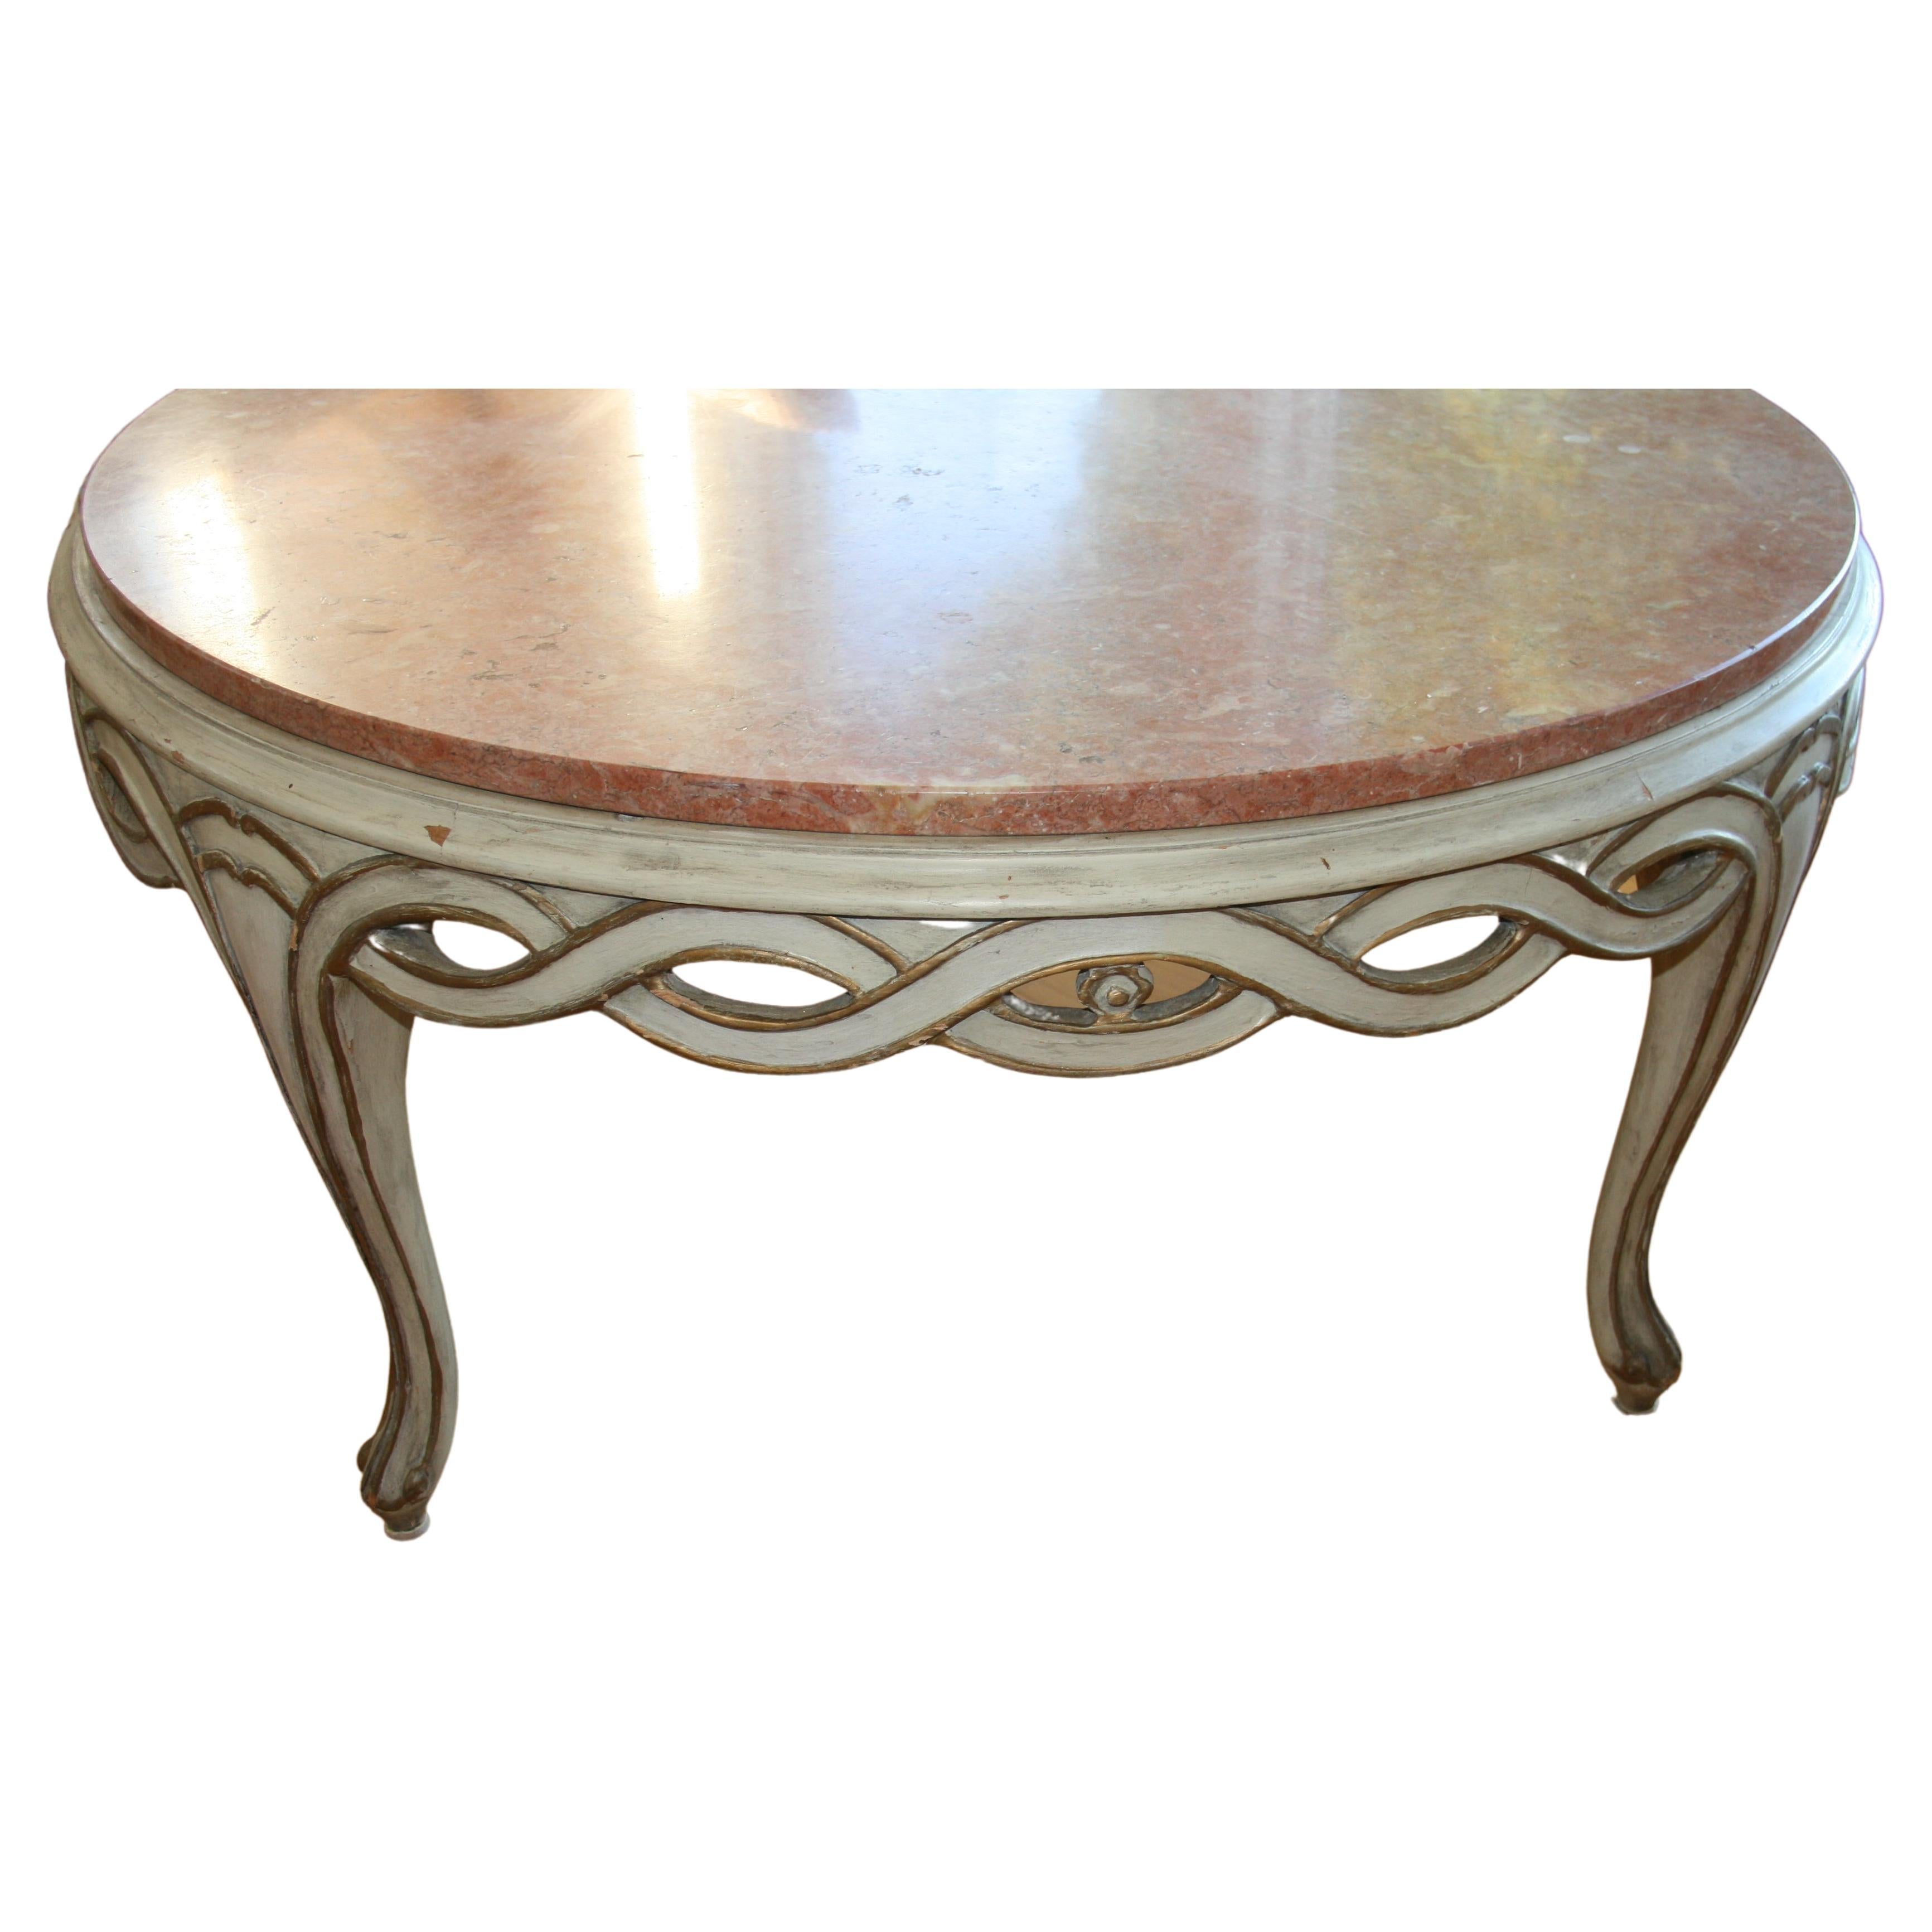 1381 Italian pink marble top coffee table with carved wood braded surround.